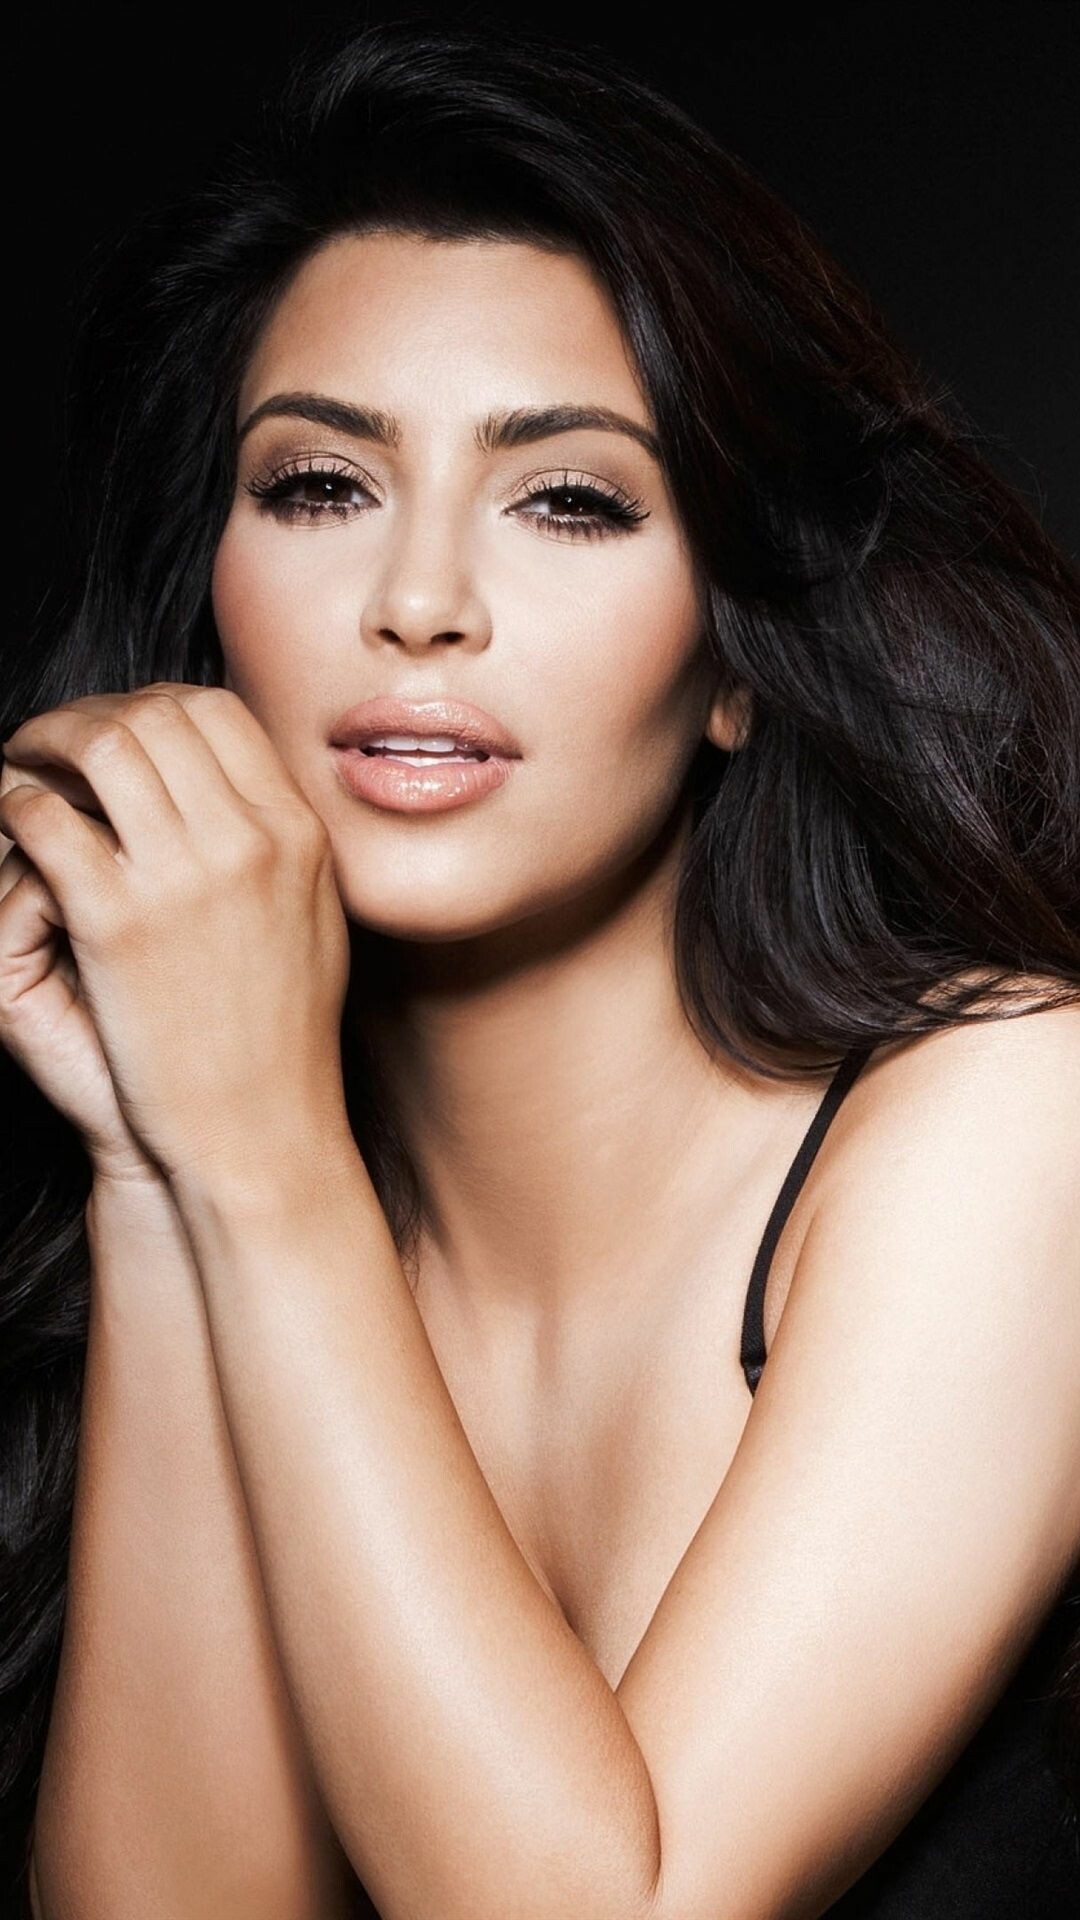 Kim Kardashian: One of the most famous and wealthiest celebrities on the earth. 1080x1920 Full HD Wallpaper.